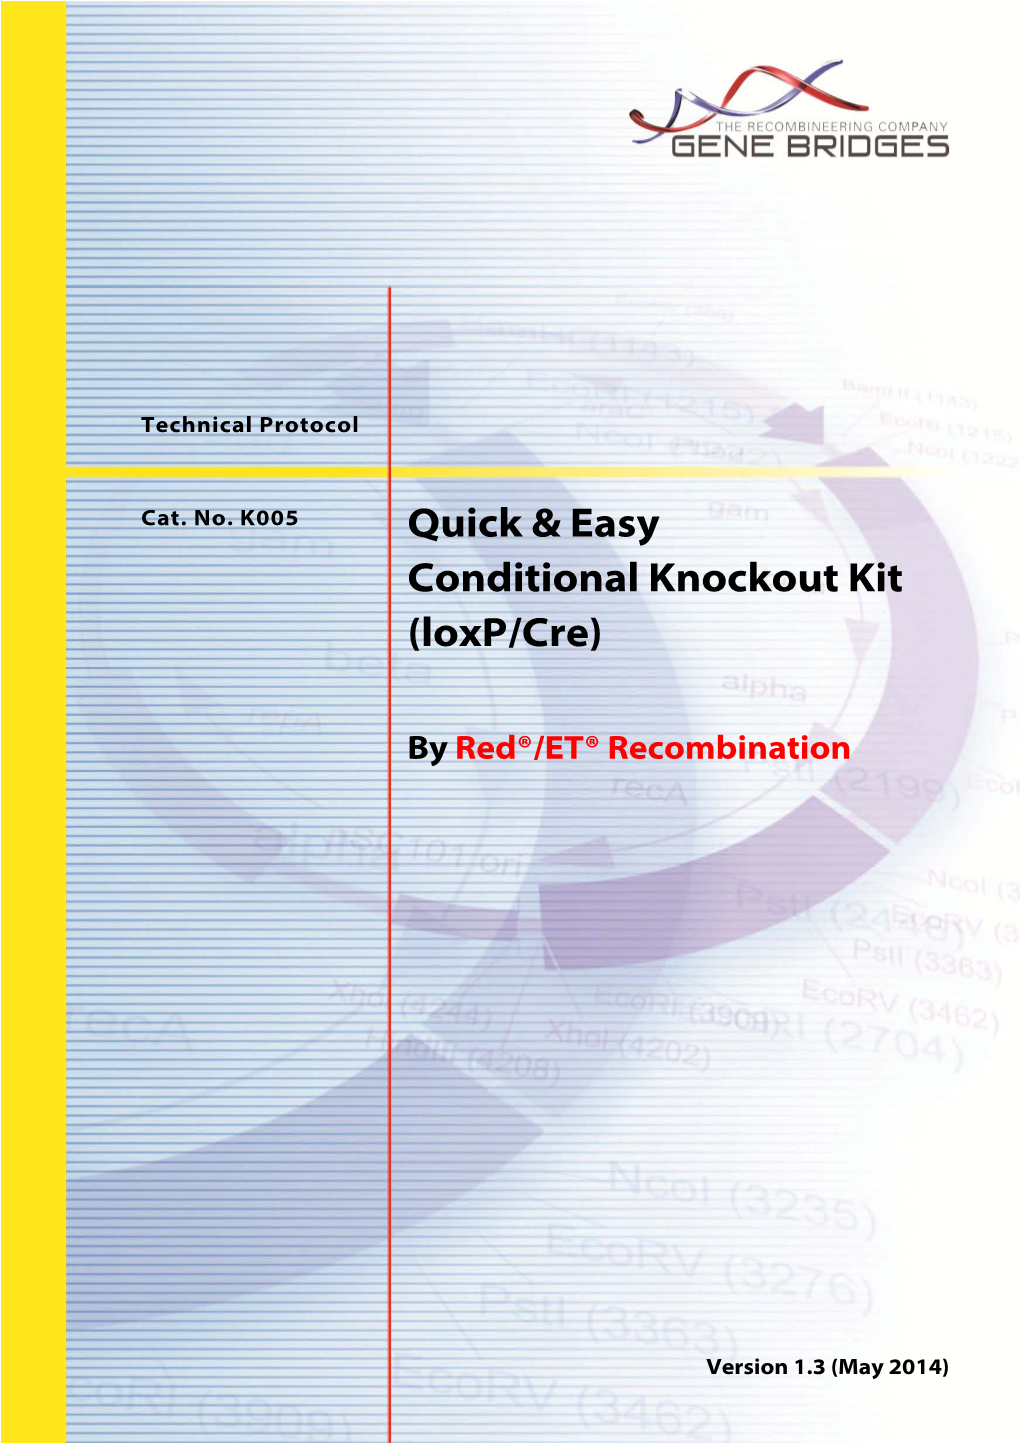 Quick & Easy Conditional Knockout Kit (Loxp/Cre)